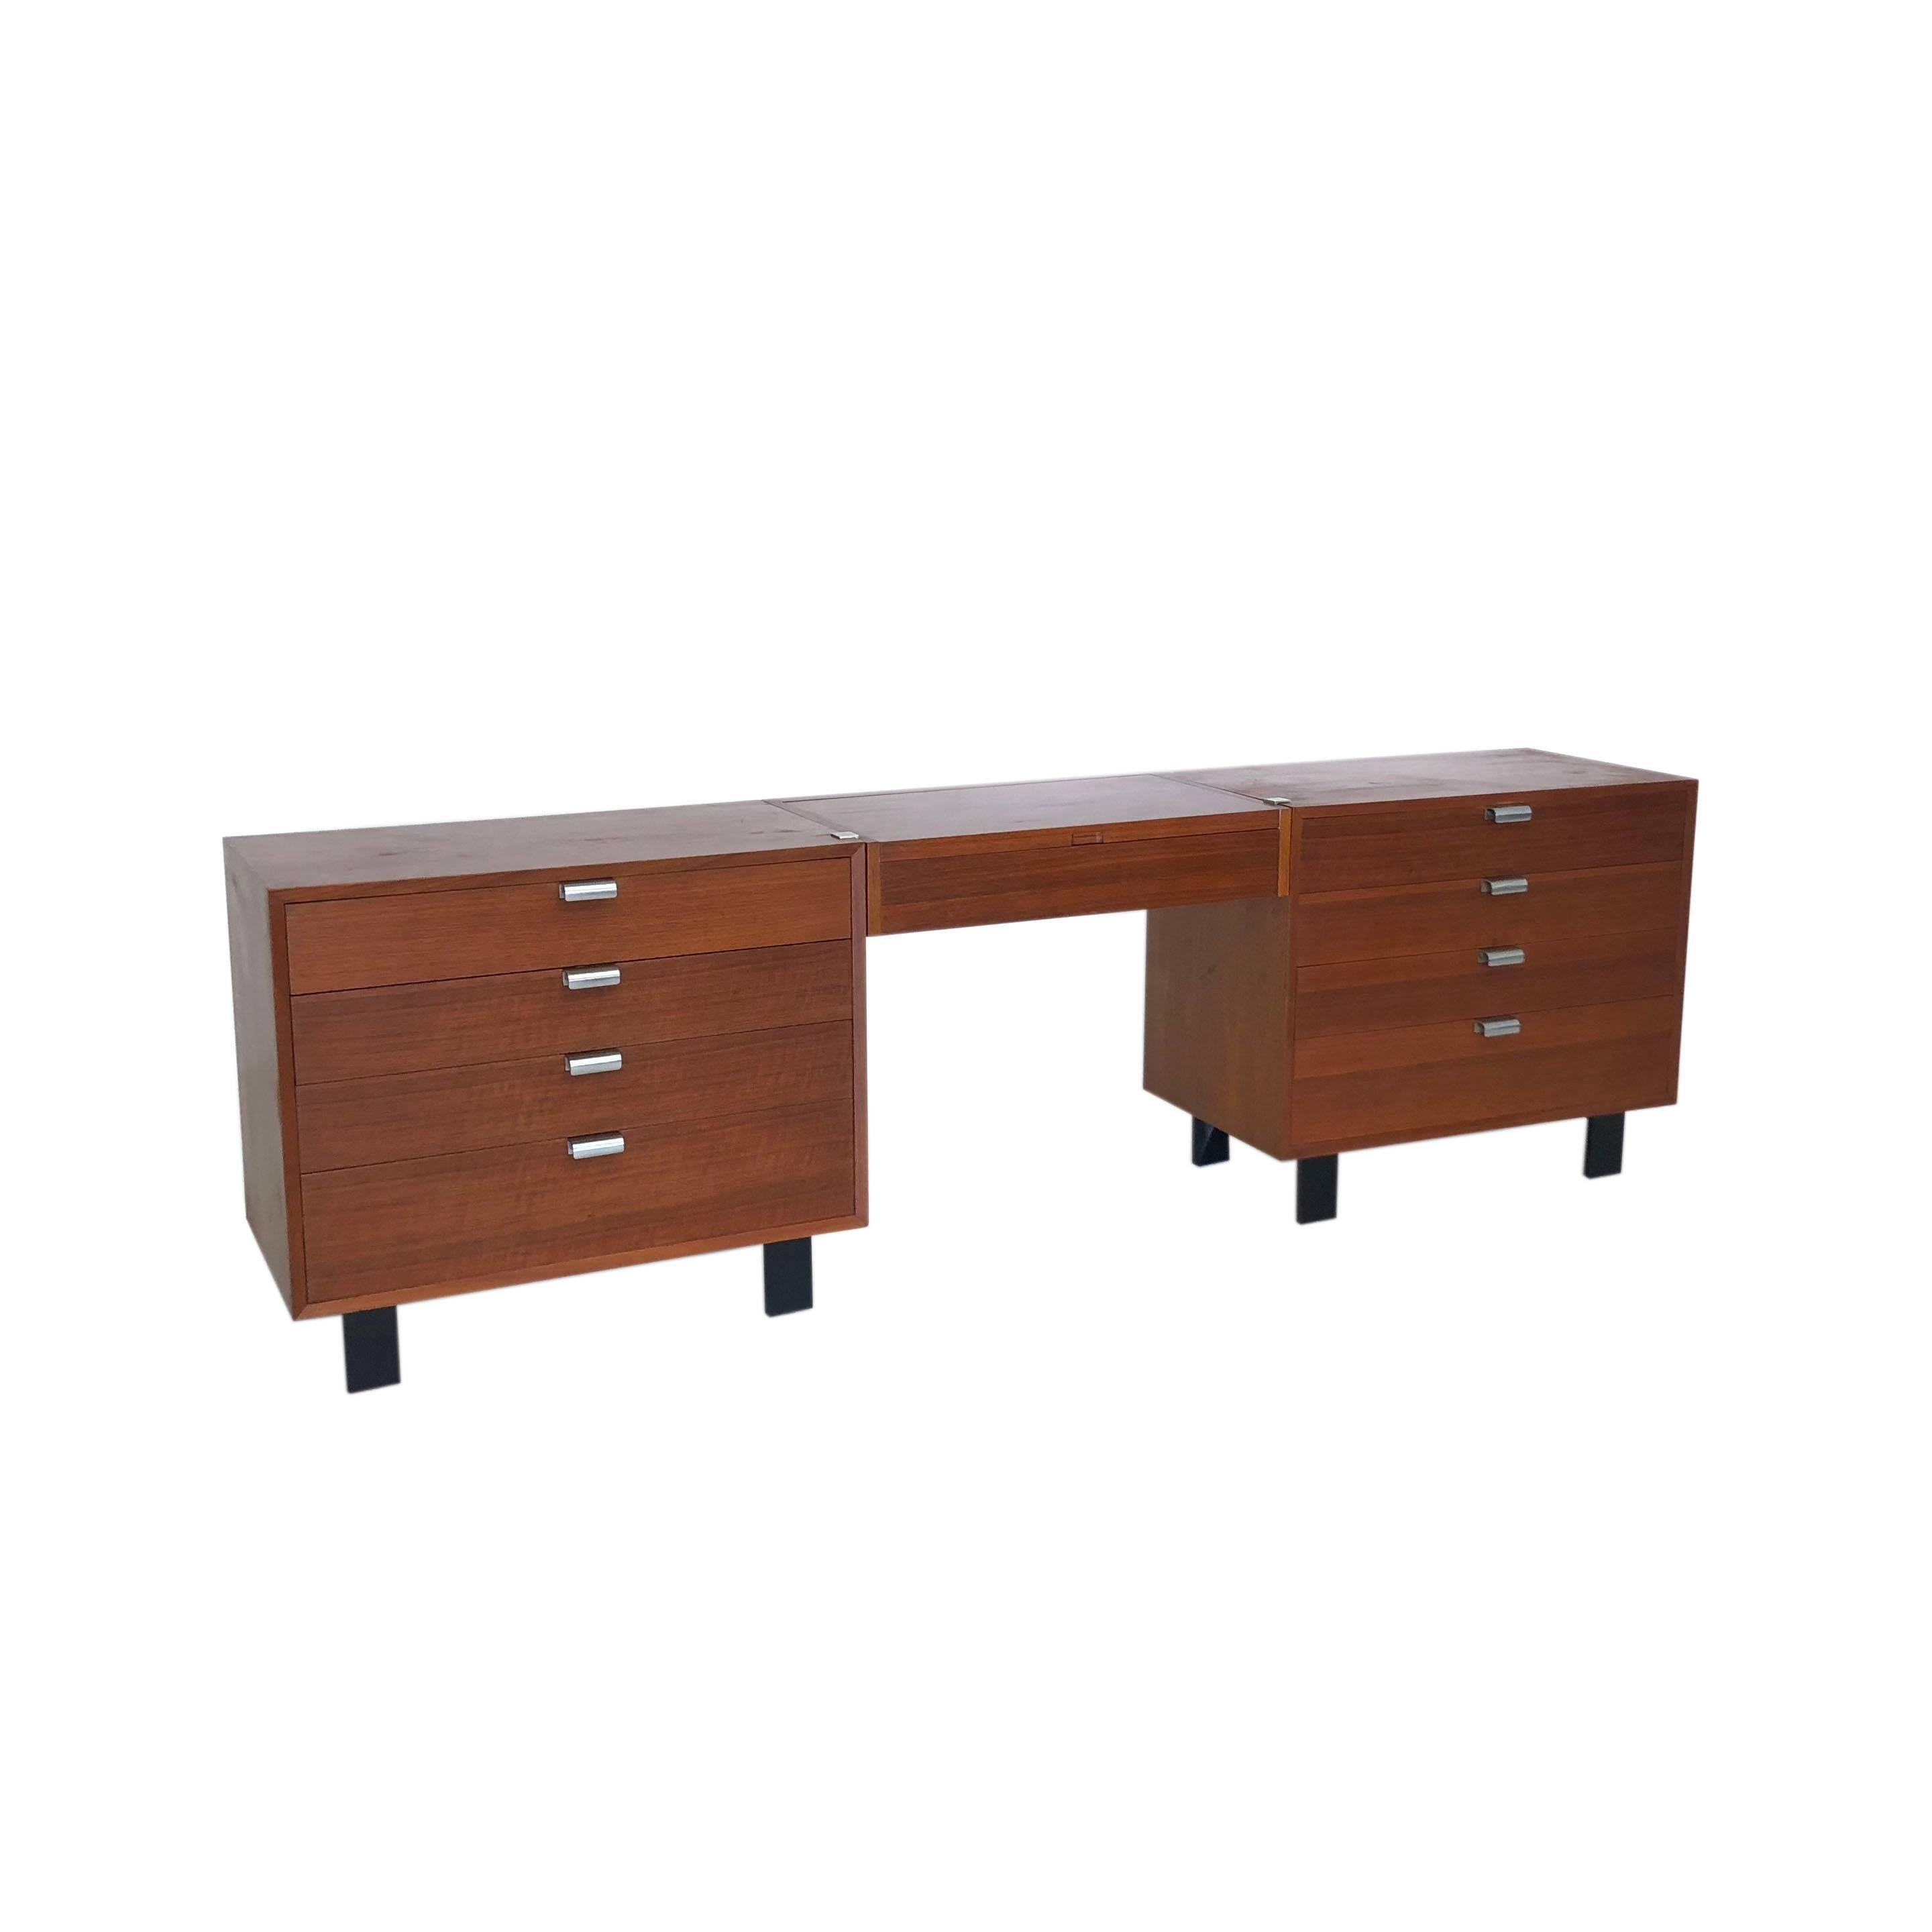 20th Century Mid-Century Modern George Nelson for Herman Miller Double Dresser with Floating For Sale